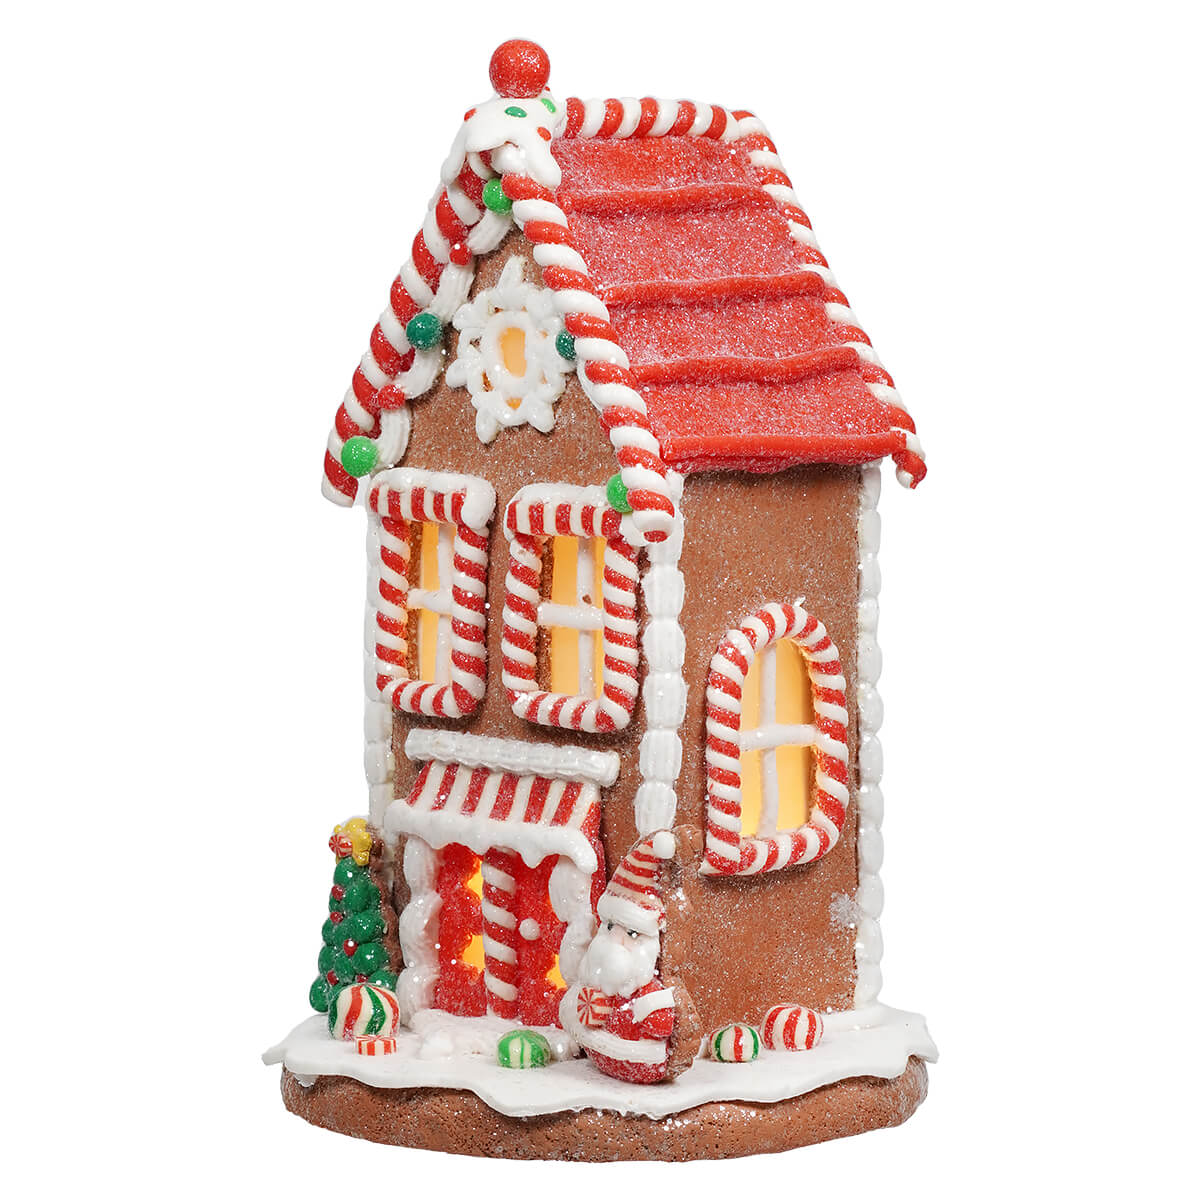 Lighted Claydough Holiday Gingerbread House With Santa